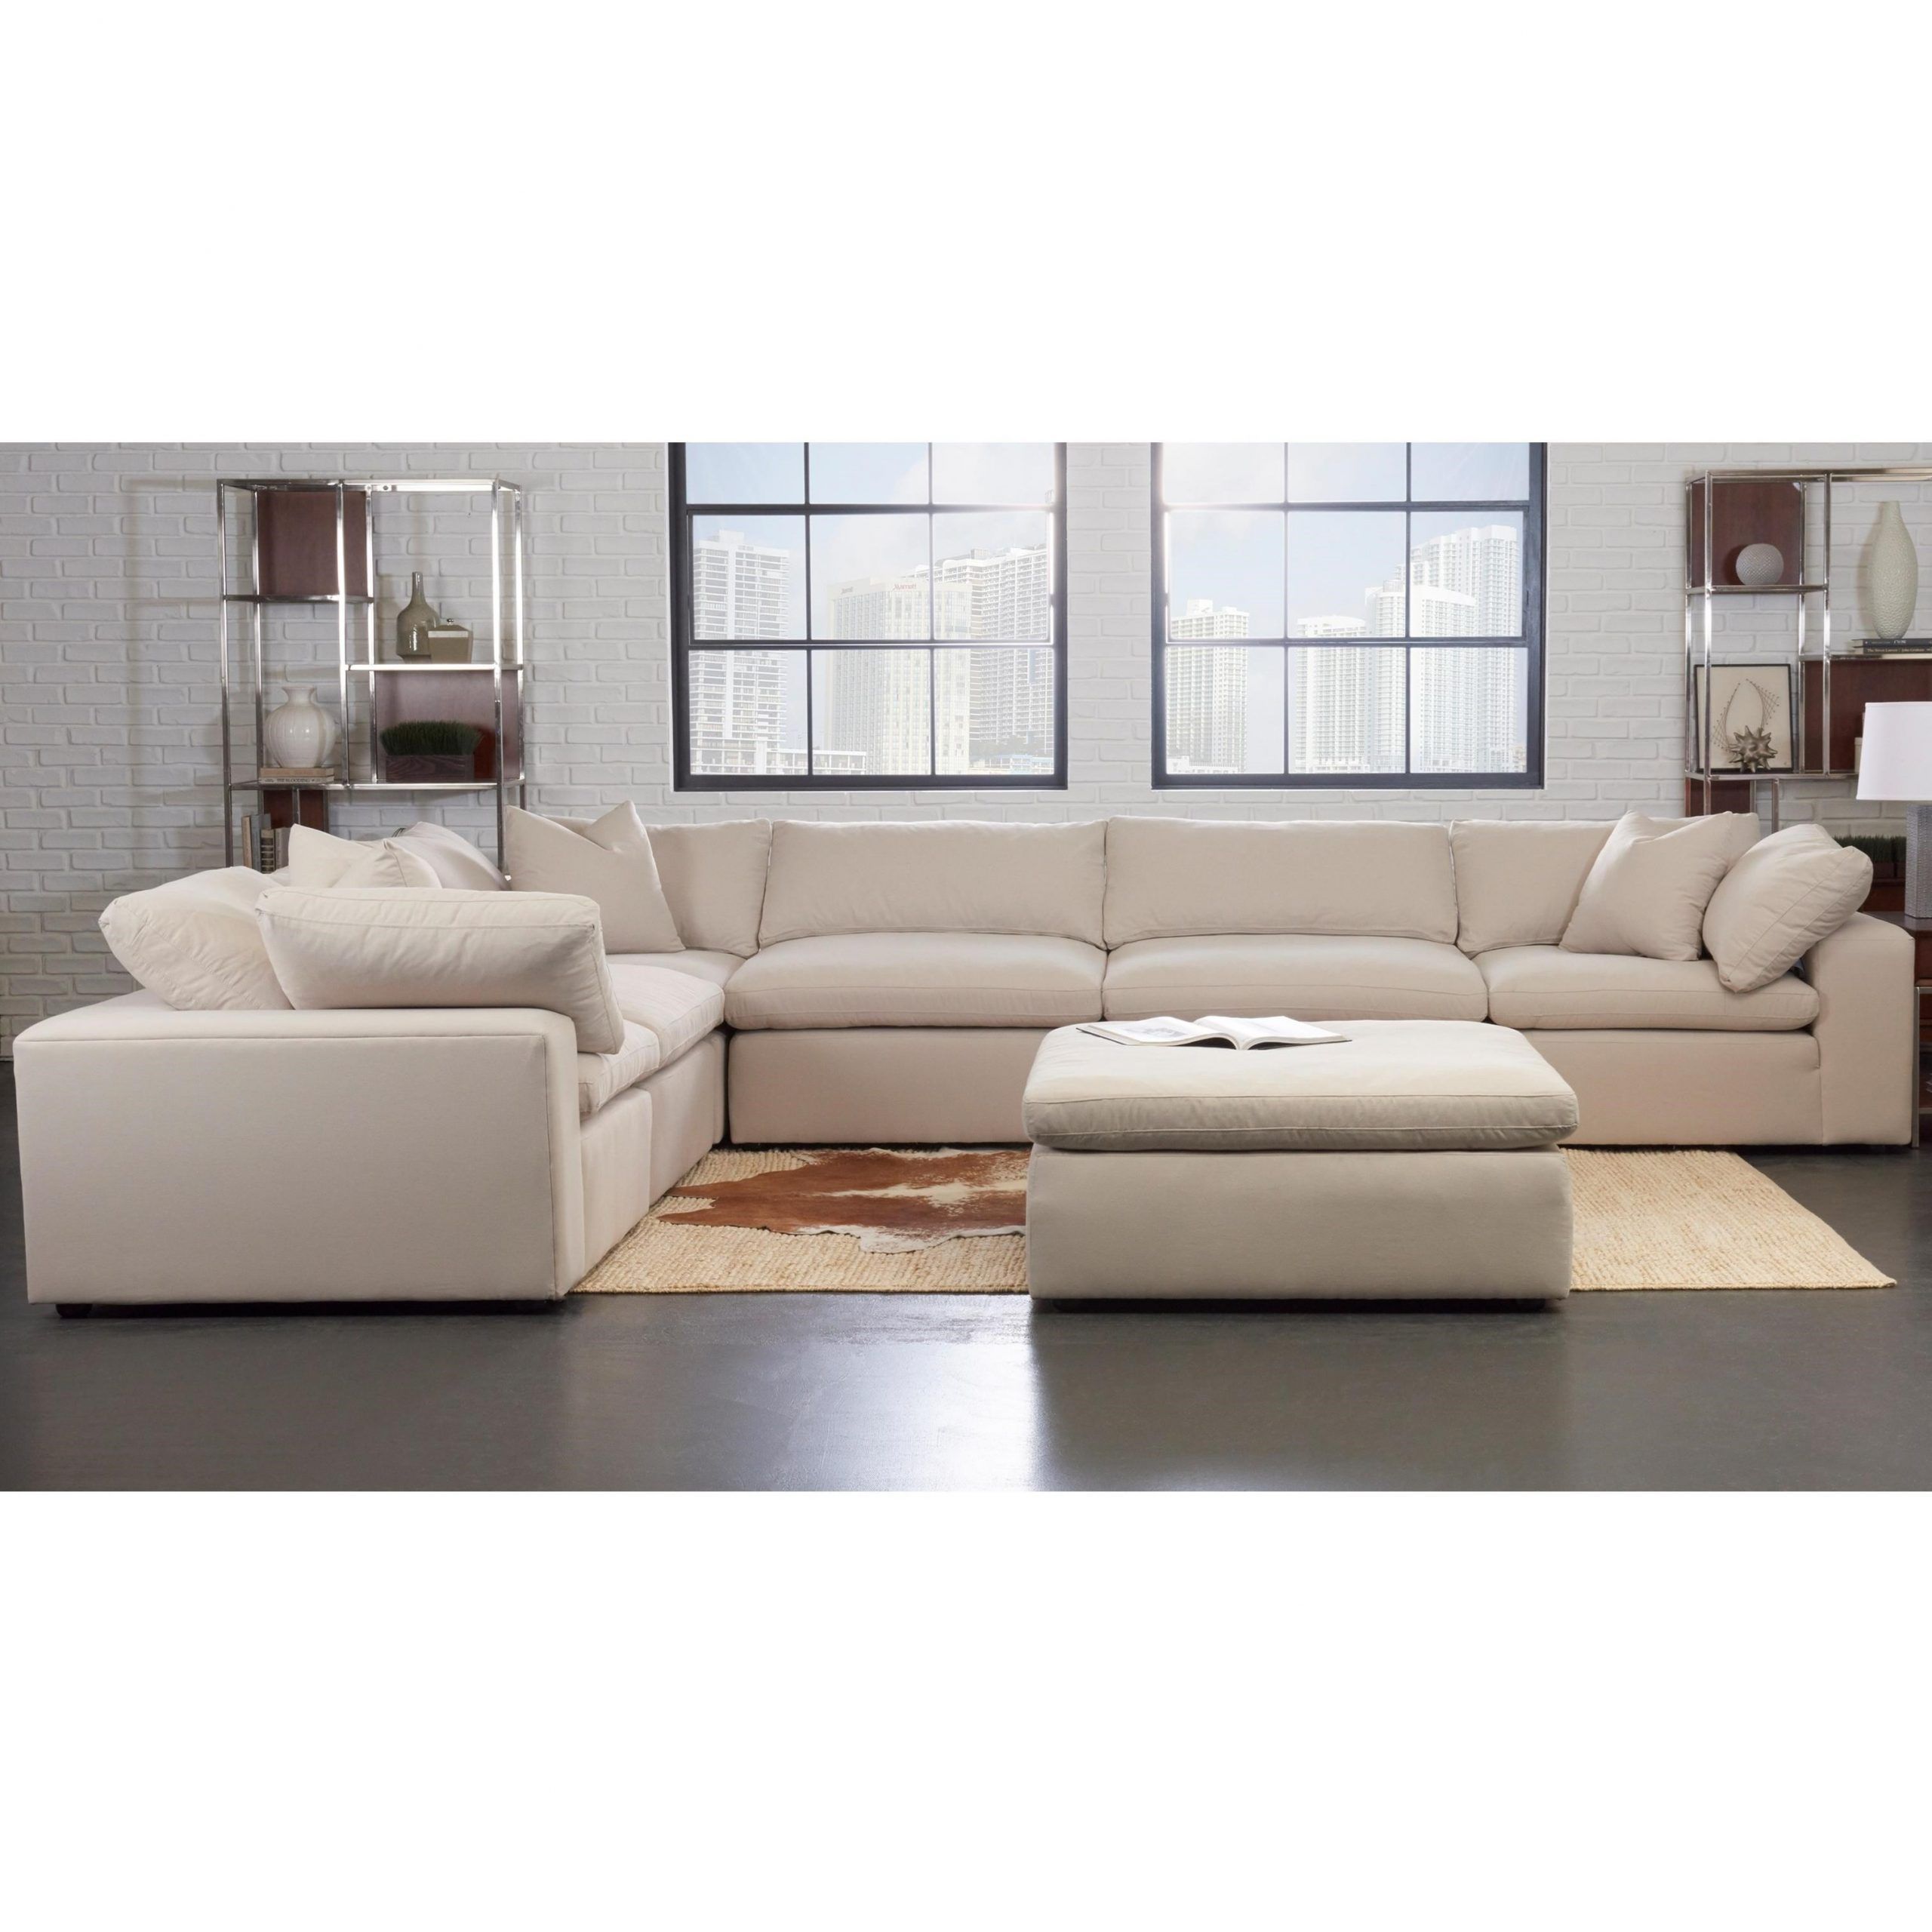 Klaussner Monterey Contemporary 6 Pc Modular Sectional Inside Paul Modular Sectional Sofas Blue (View 10 of 15)